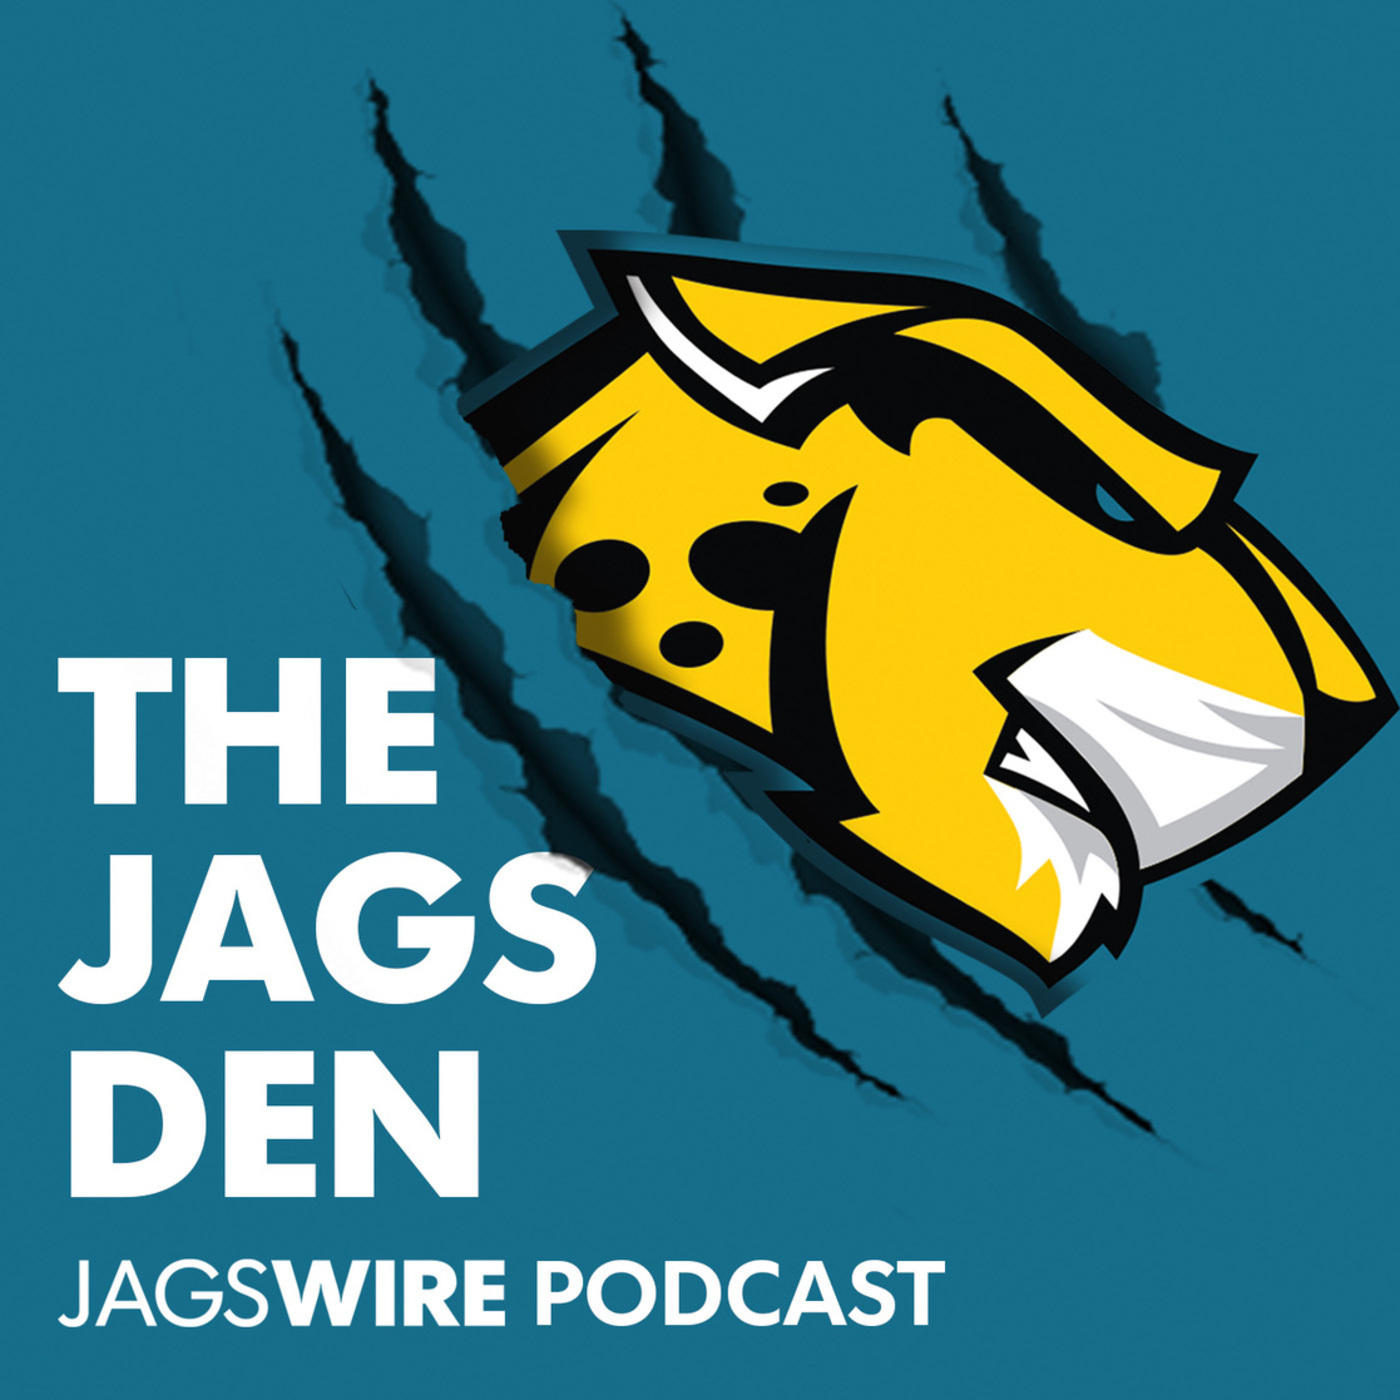 Jags Den Podcast Ep. 38: Discussion on the Jags 2019 draft class, UDFAs and Telvin Smith